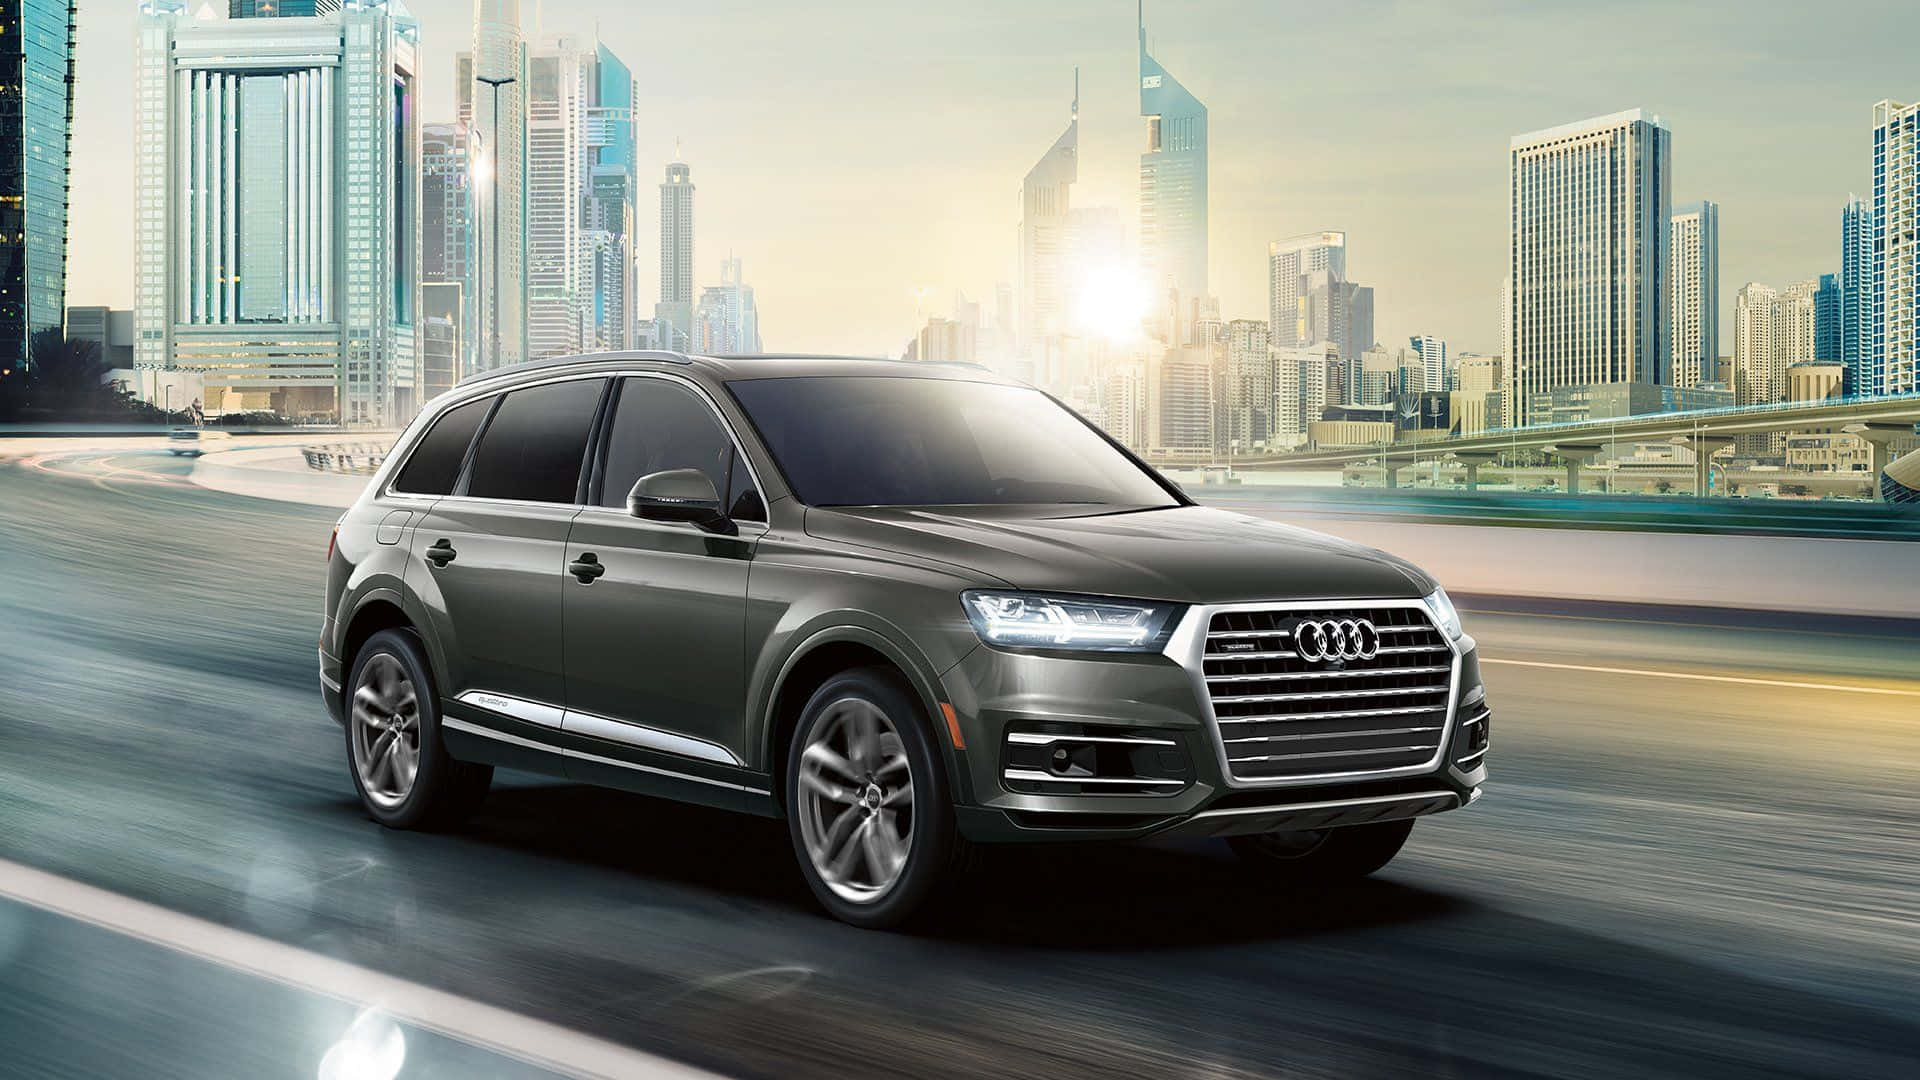 Sleek Audi Q7 - The Epitome of Luxury and Performance Wallpaper